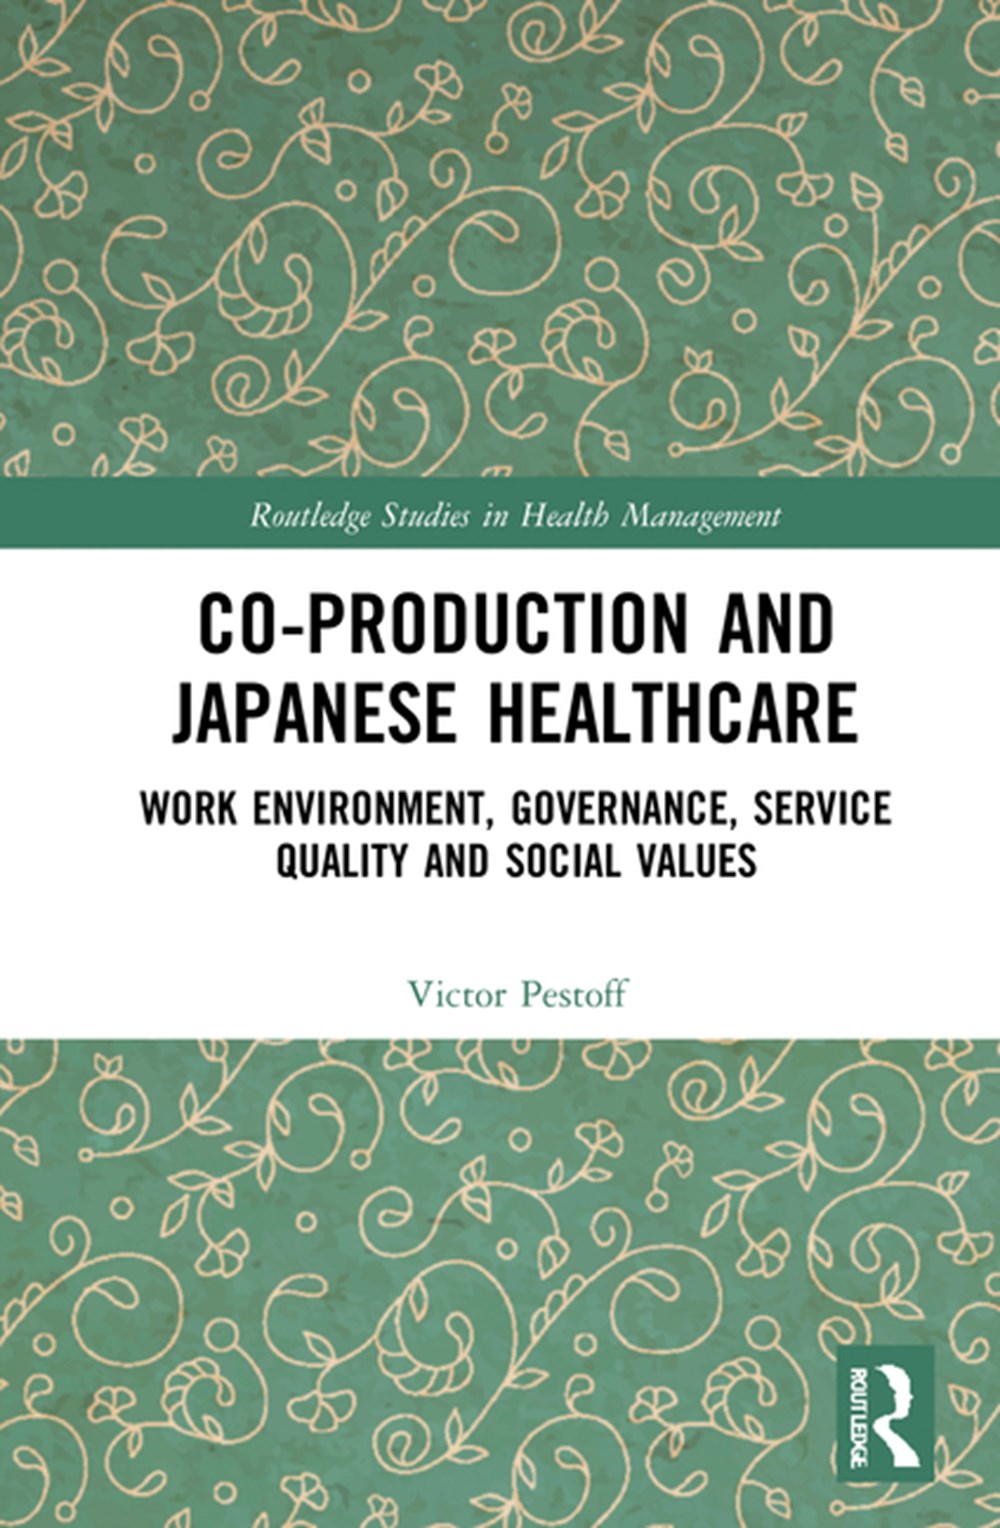 Co-Production and Japanese Healthcare Work Environment, Governance, Service Quality and Social Value